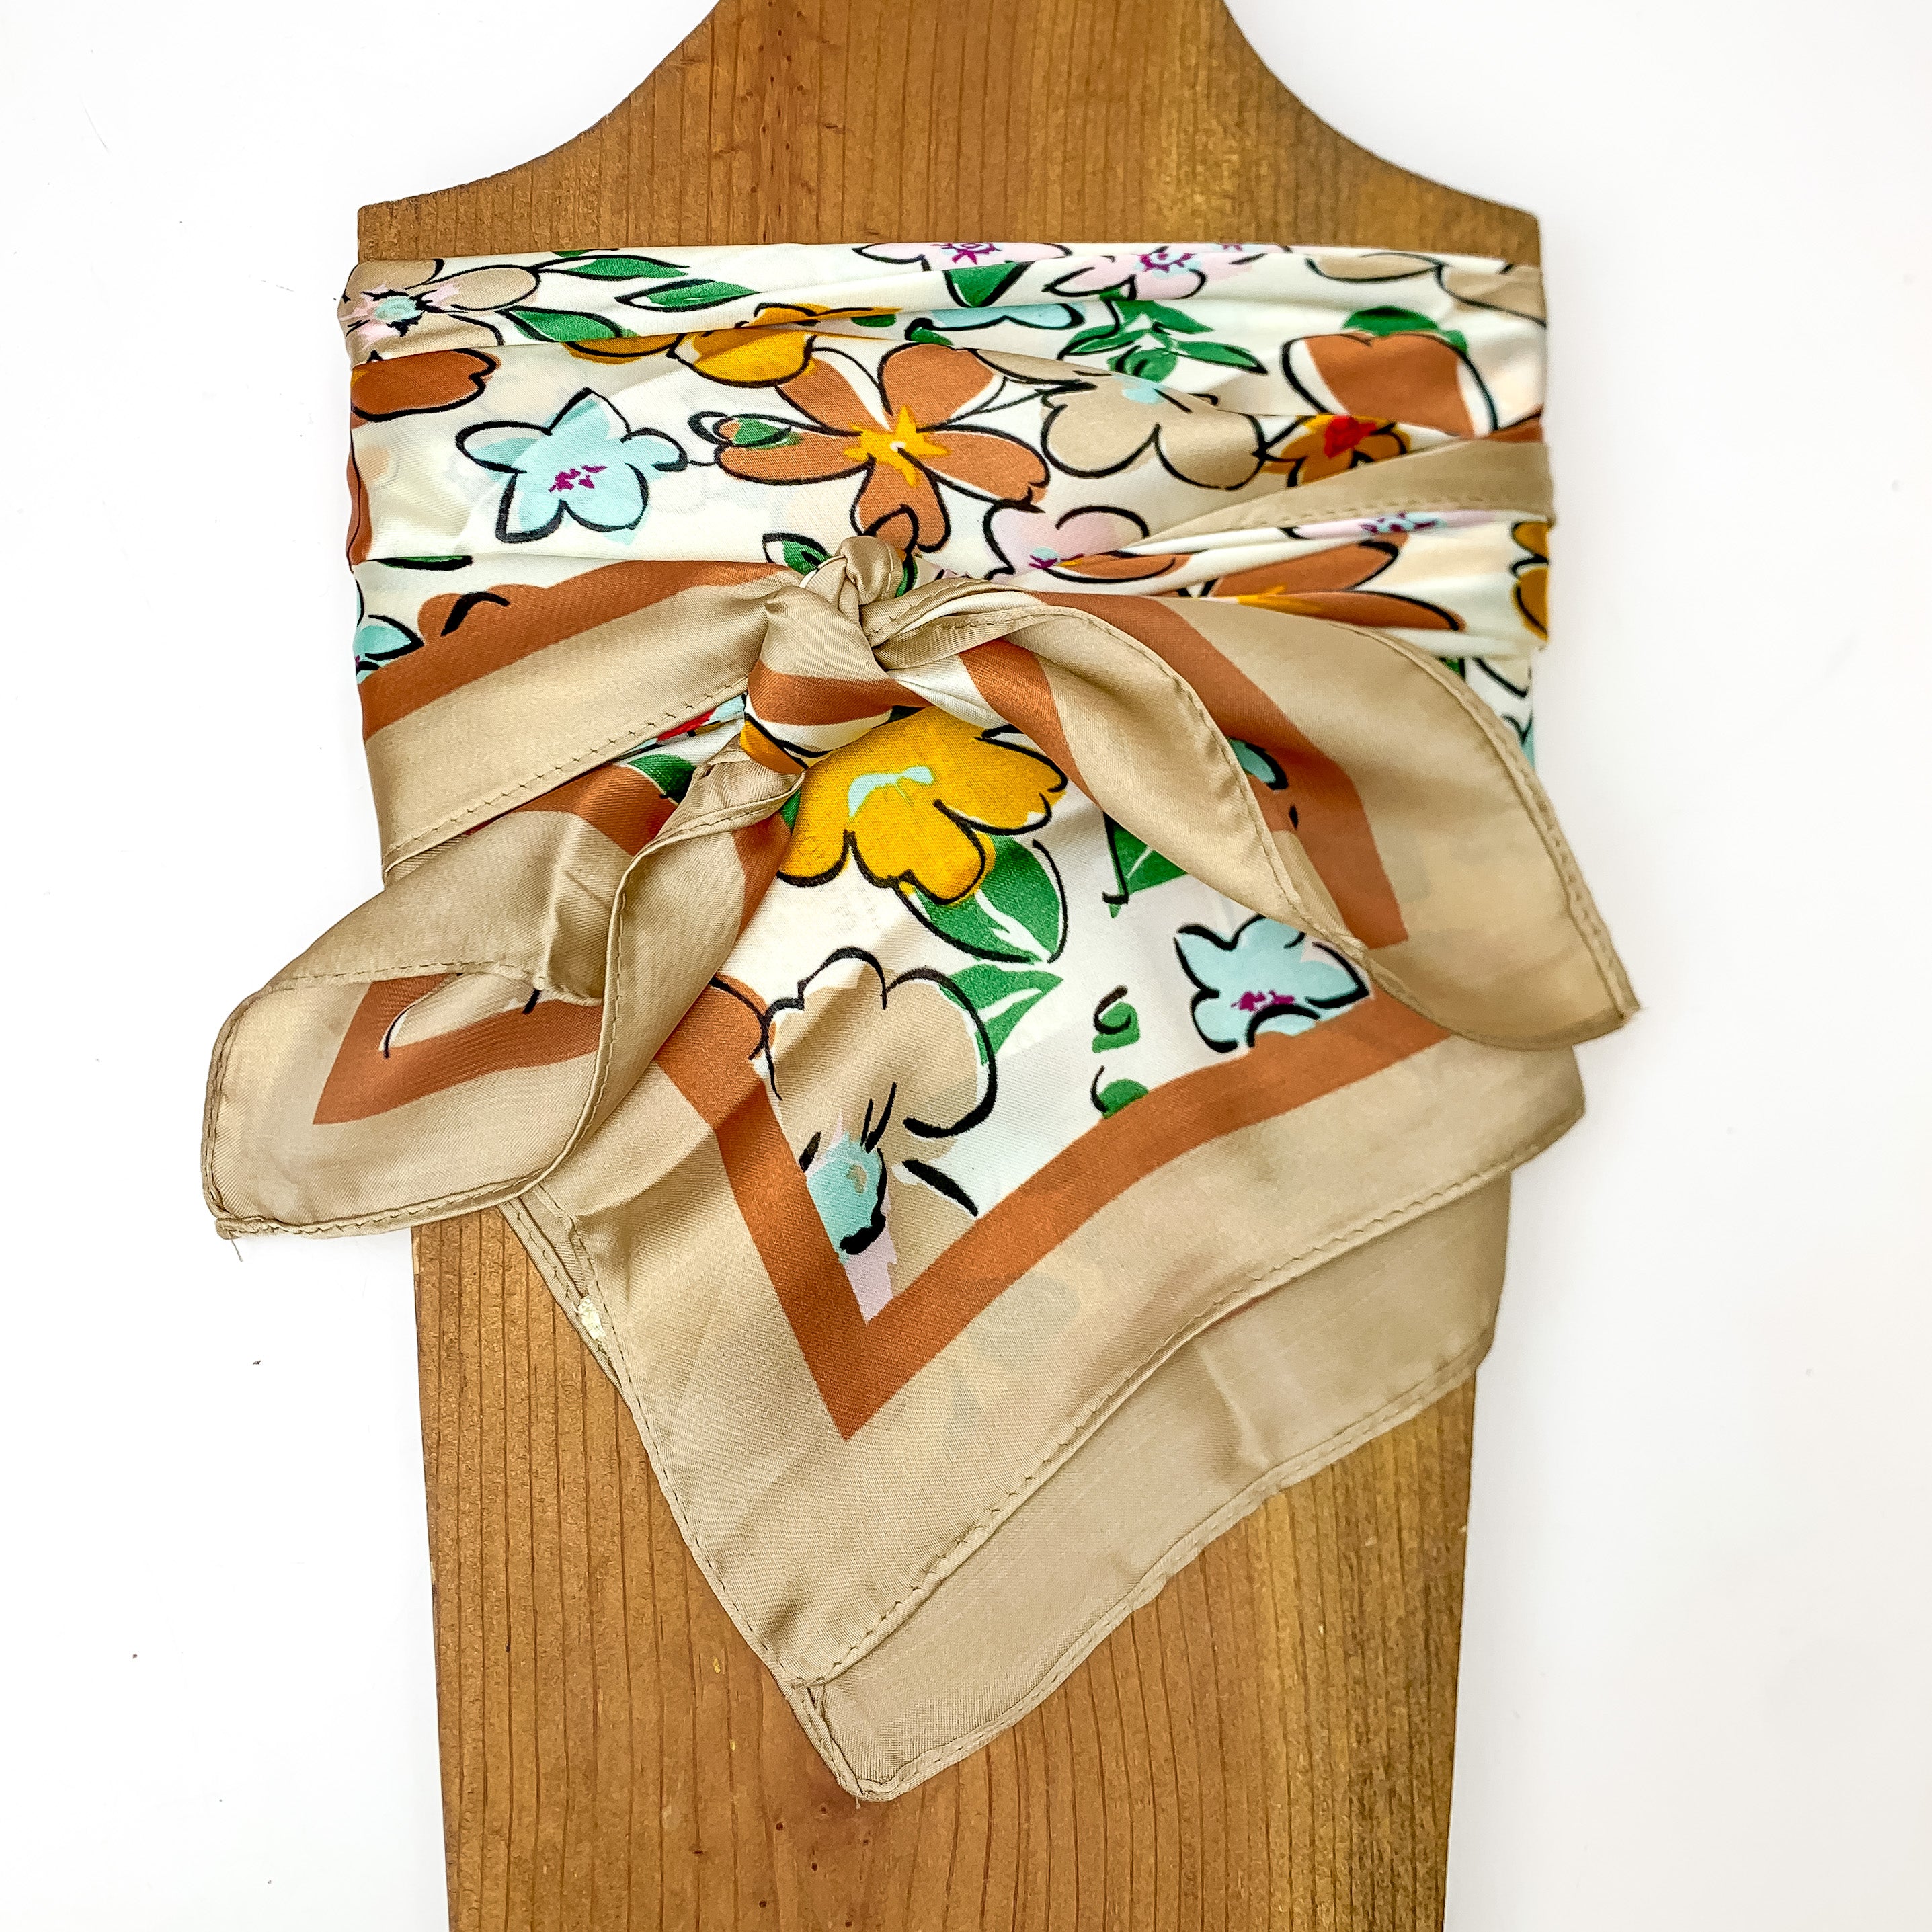 Flower Print Wild Rag in beige. This scarf is pictured tied around a wood piece with a white background.